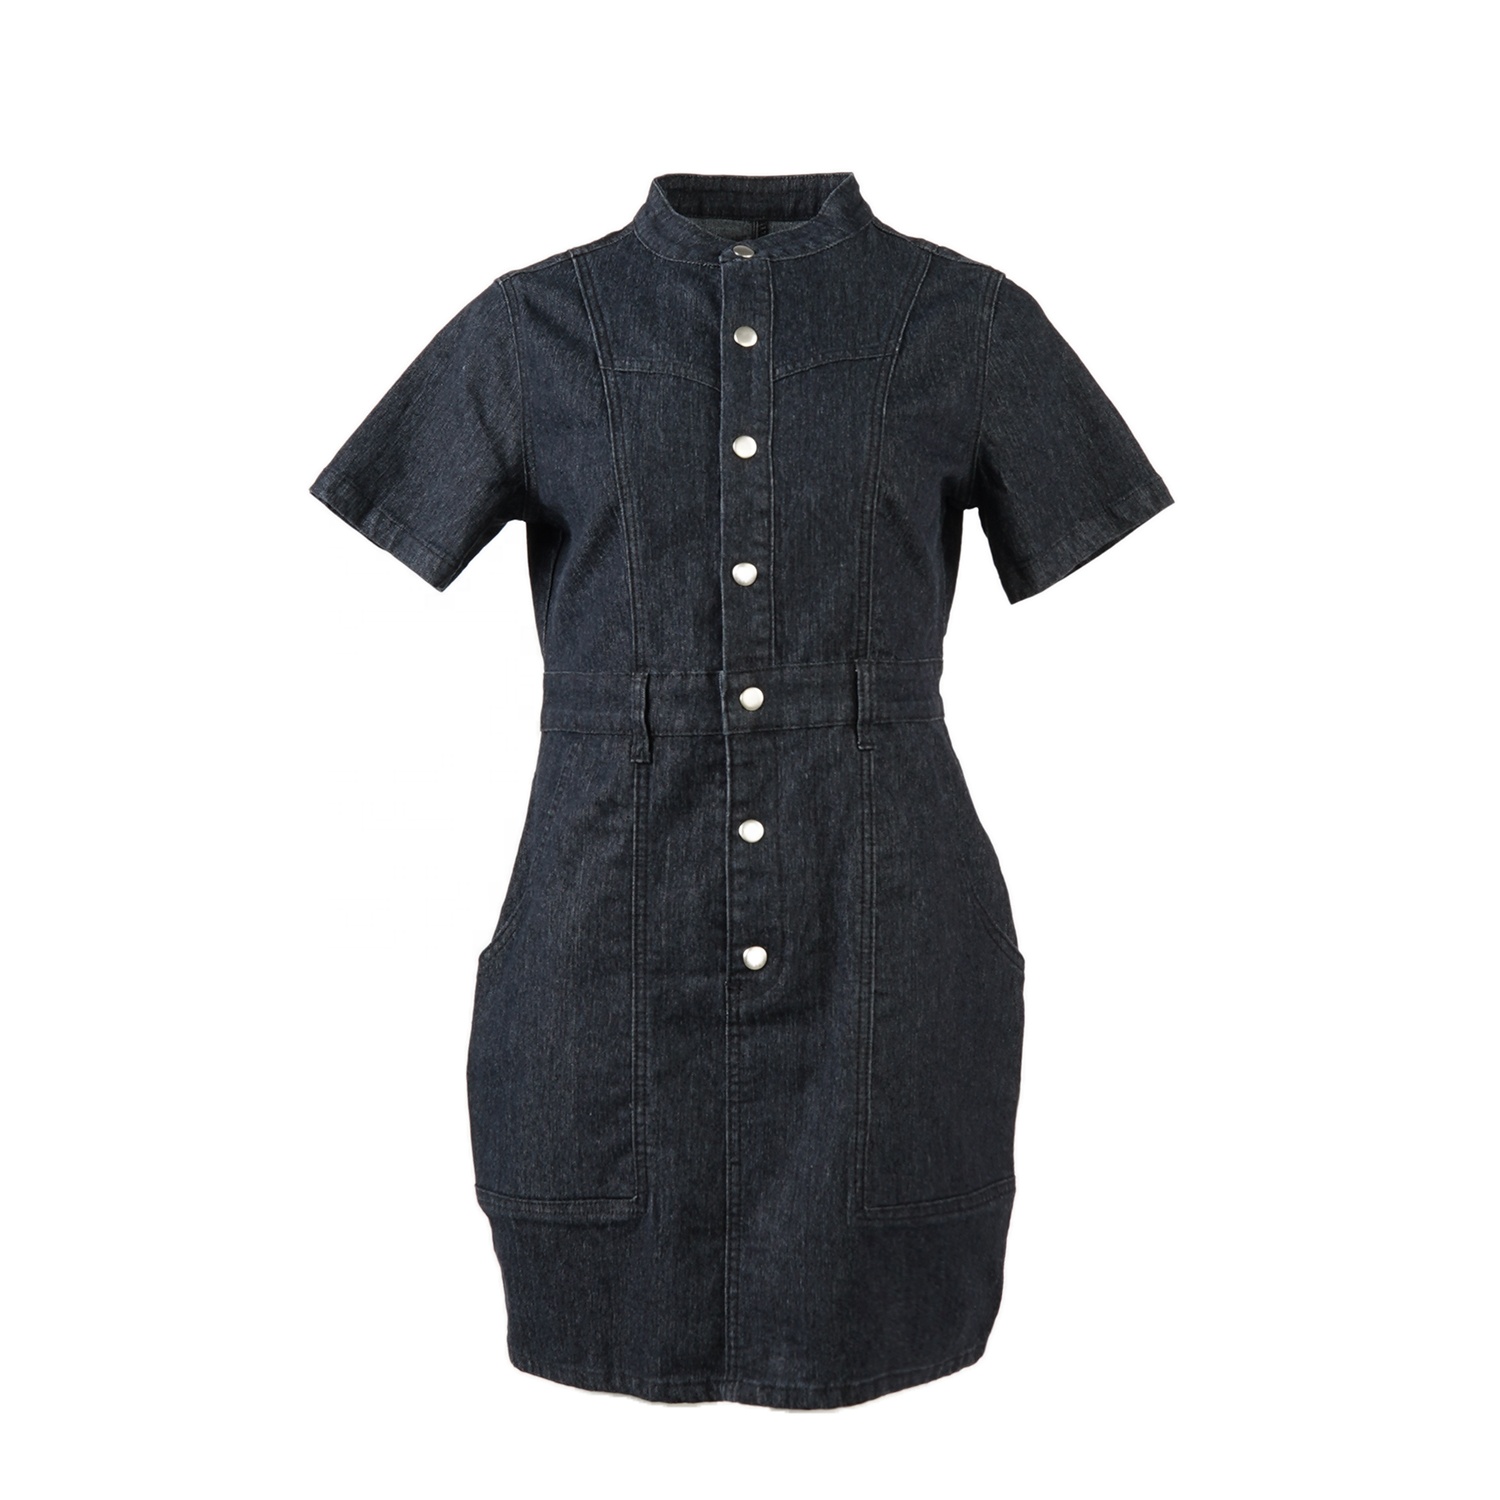 SKYKINGDOM OEM accepted denim dress sexy outfit mini short black comfy summer casual dress for lady